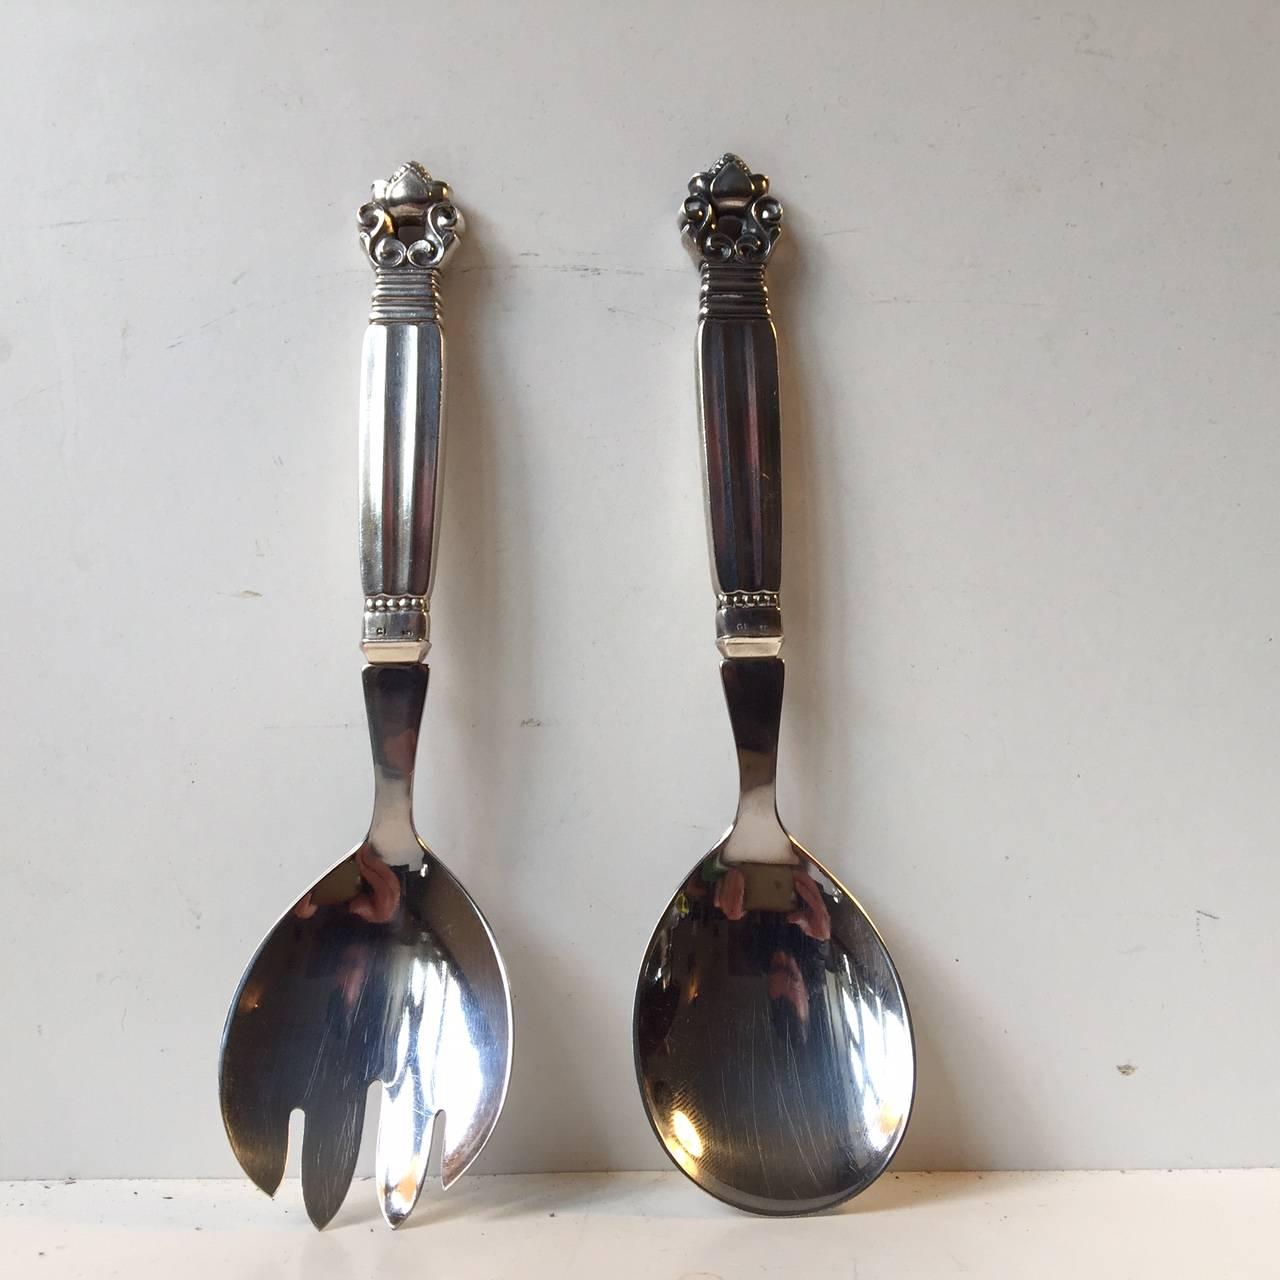 - A Georg Jensen Acorn salad set
- Designed by Johan Rohde
- Made with sterling silver and stainless steel
- The set is stamped
- It was manufactured, circa 1950.